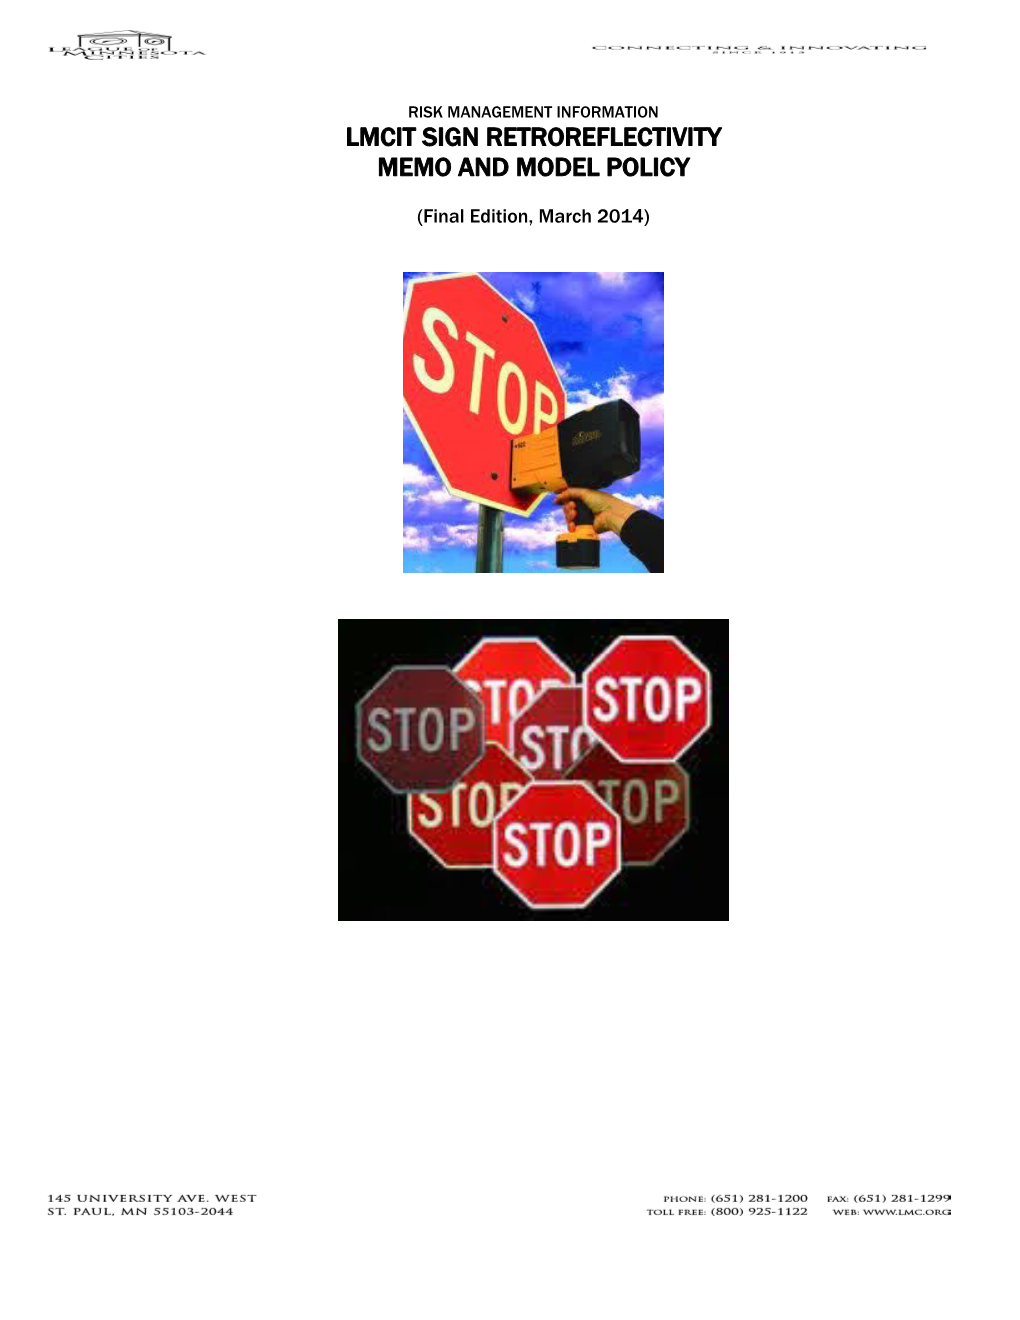 Memo and Model Policy